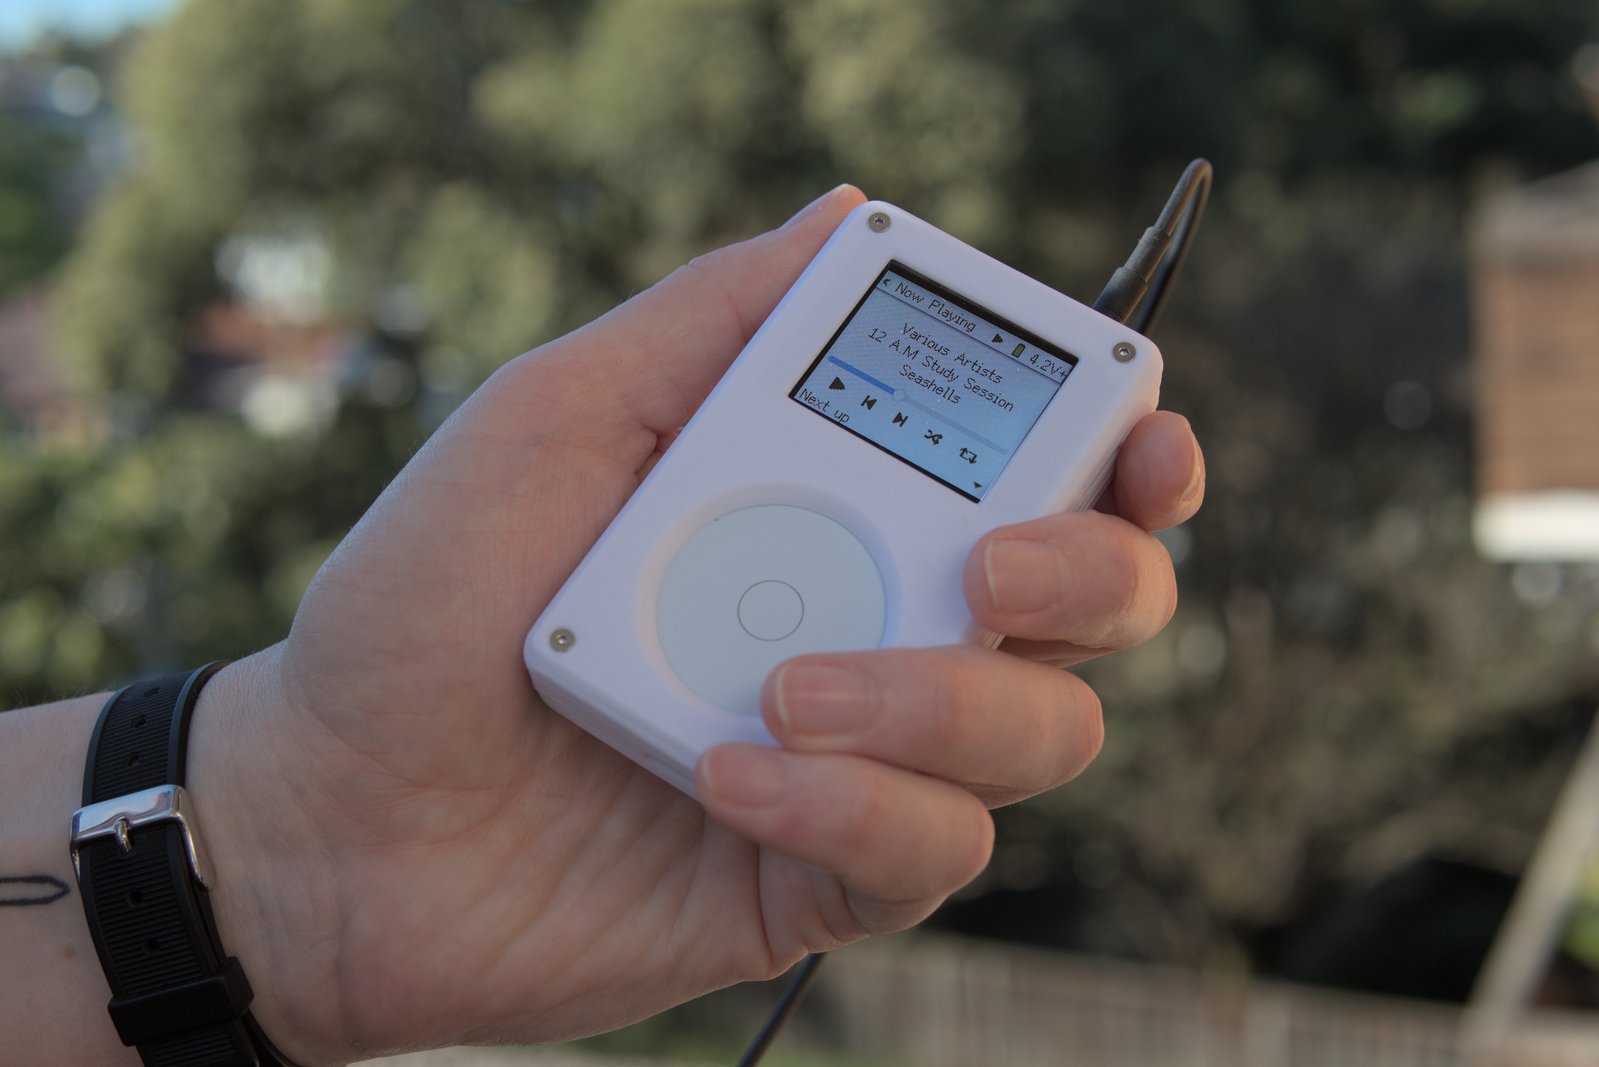 It's a Tangara music player! It's a little rectangular device being held in someone's hand. The front has a screen showing a 'Now Playing' screen, and a circular white touchwheel.